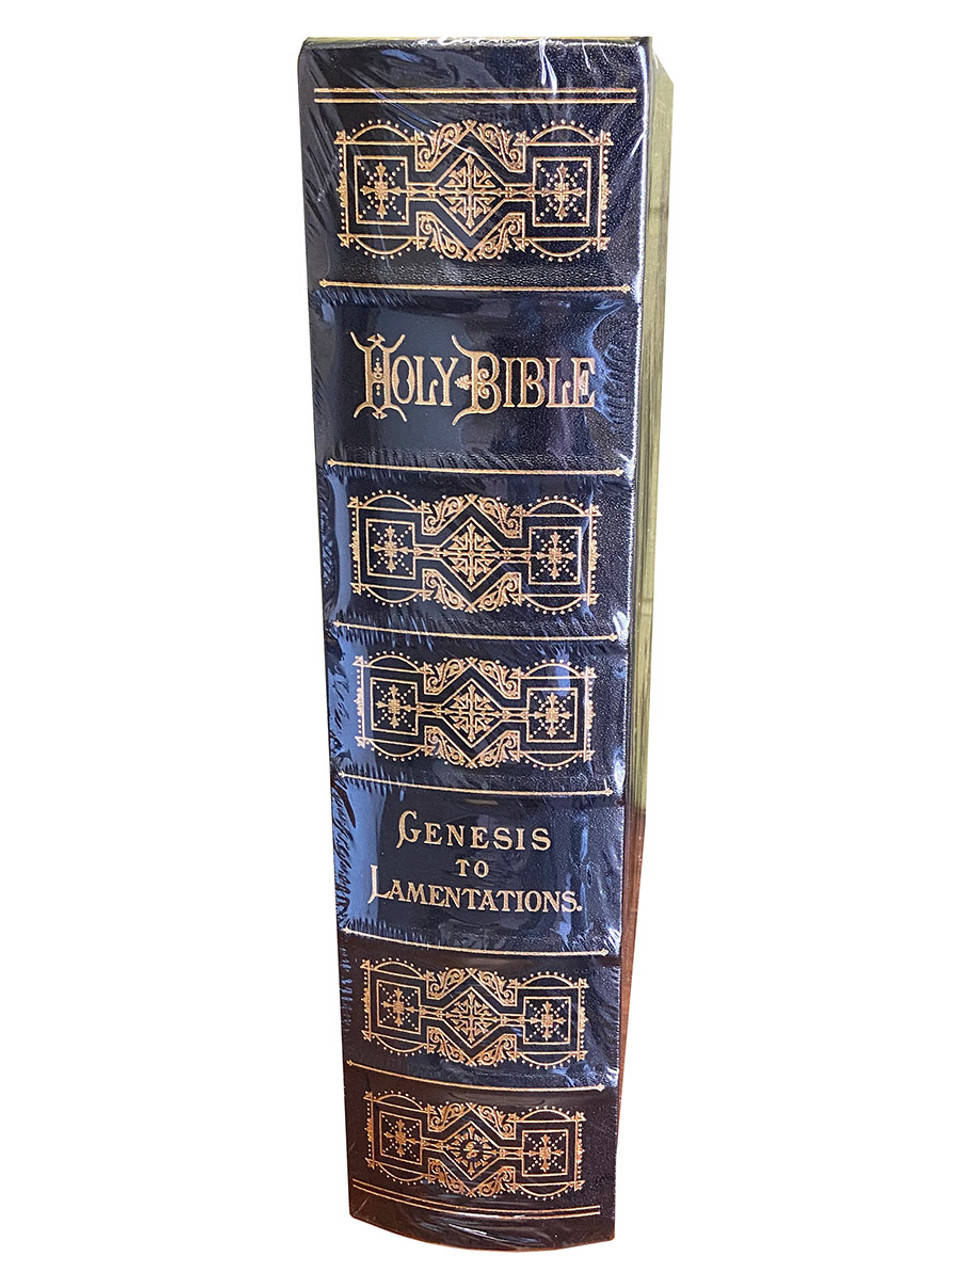 Easton Press "The Holy Bible" Gustave Doré,  Leather Bound Deluxe Collector's Edition, 2-Vol. Matched Set  Limited Edition of 800 [Sealed]